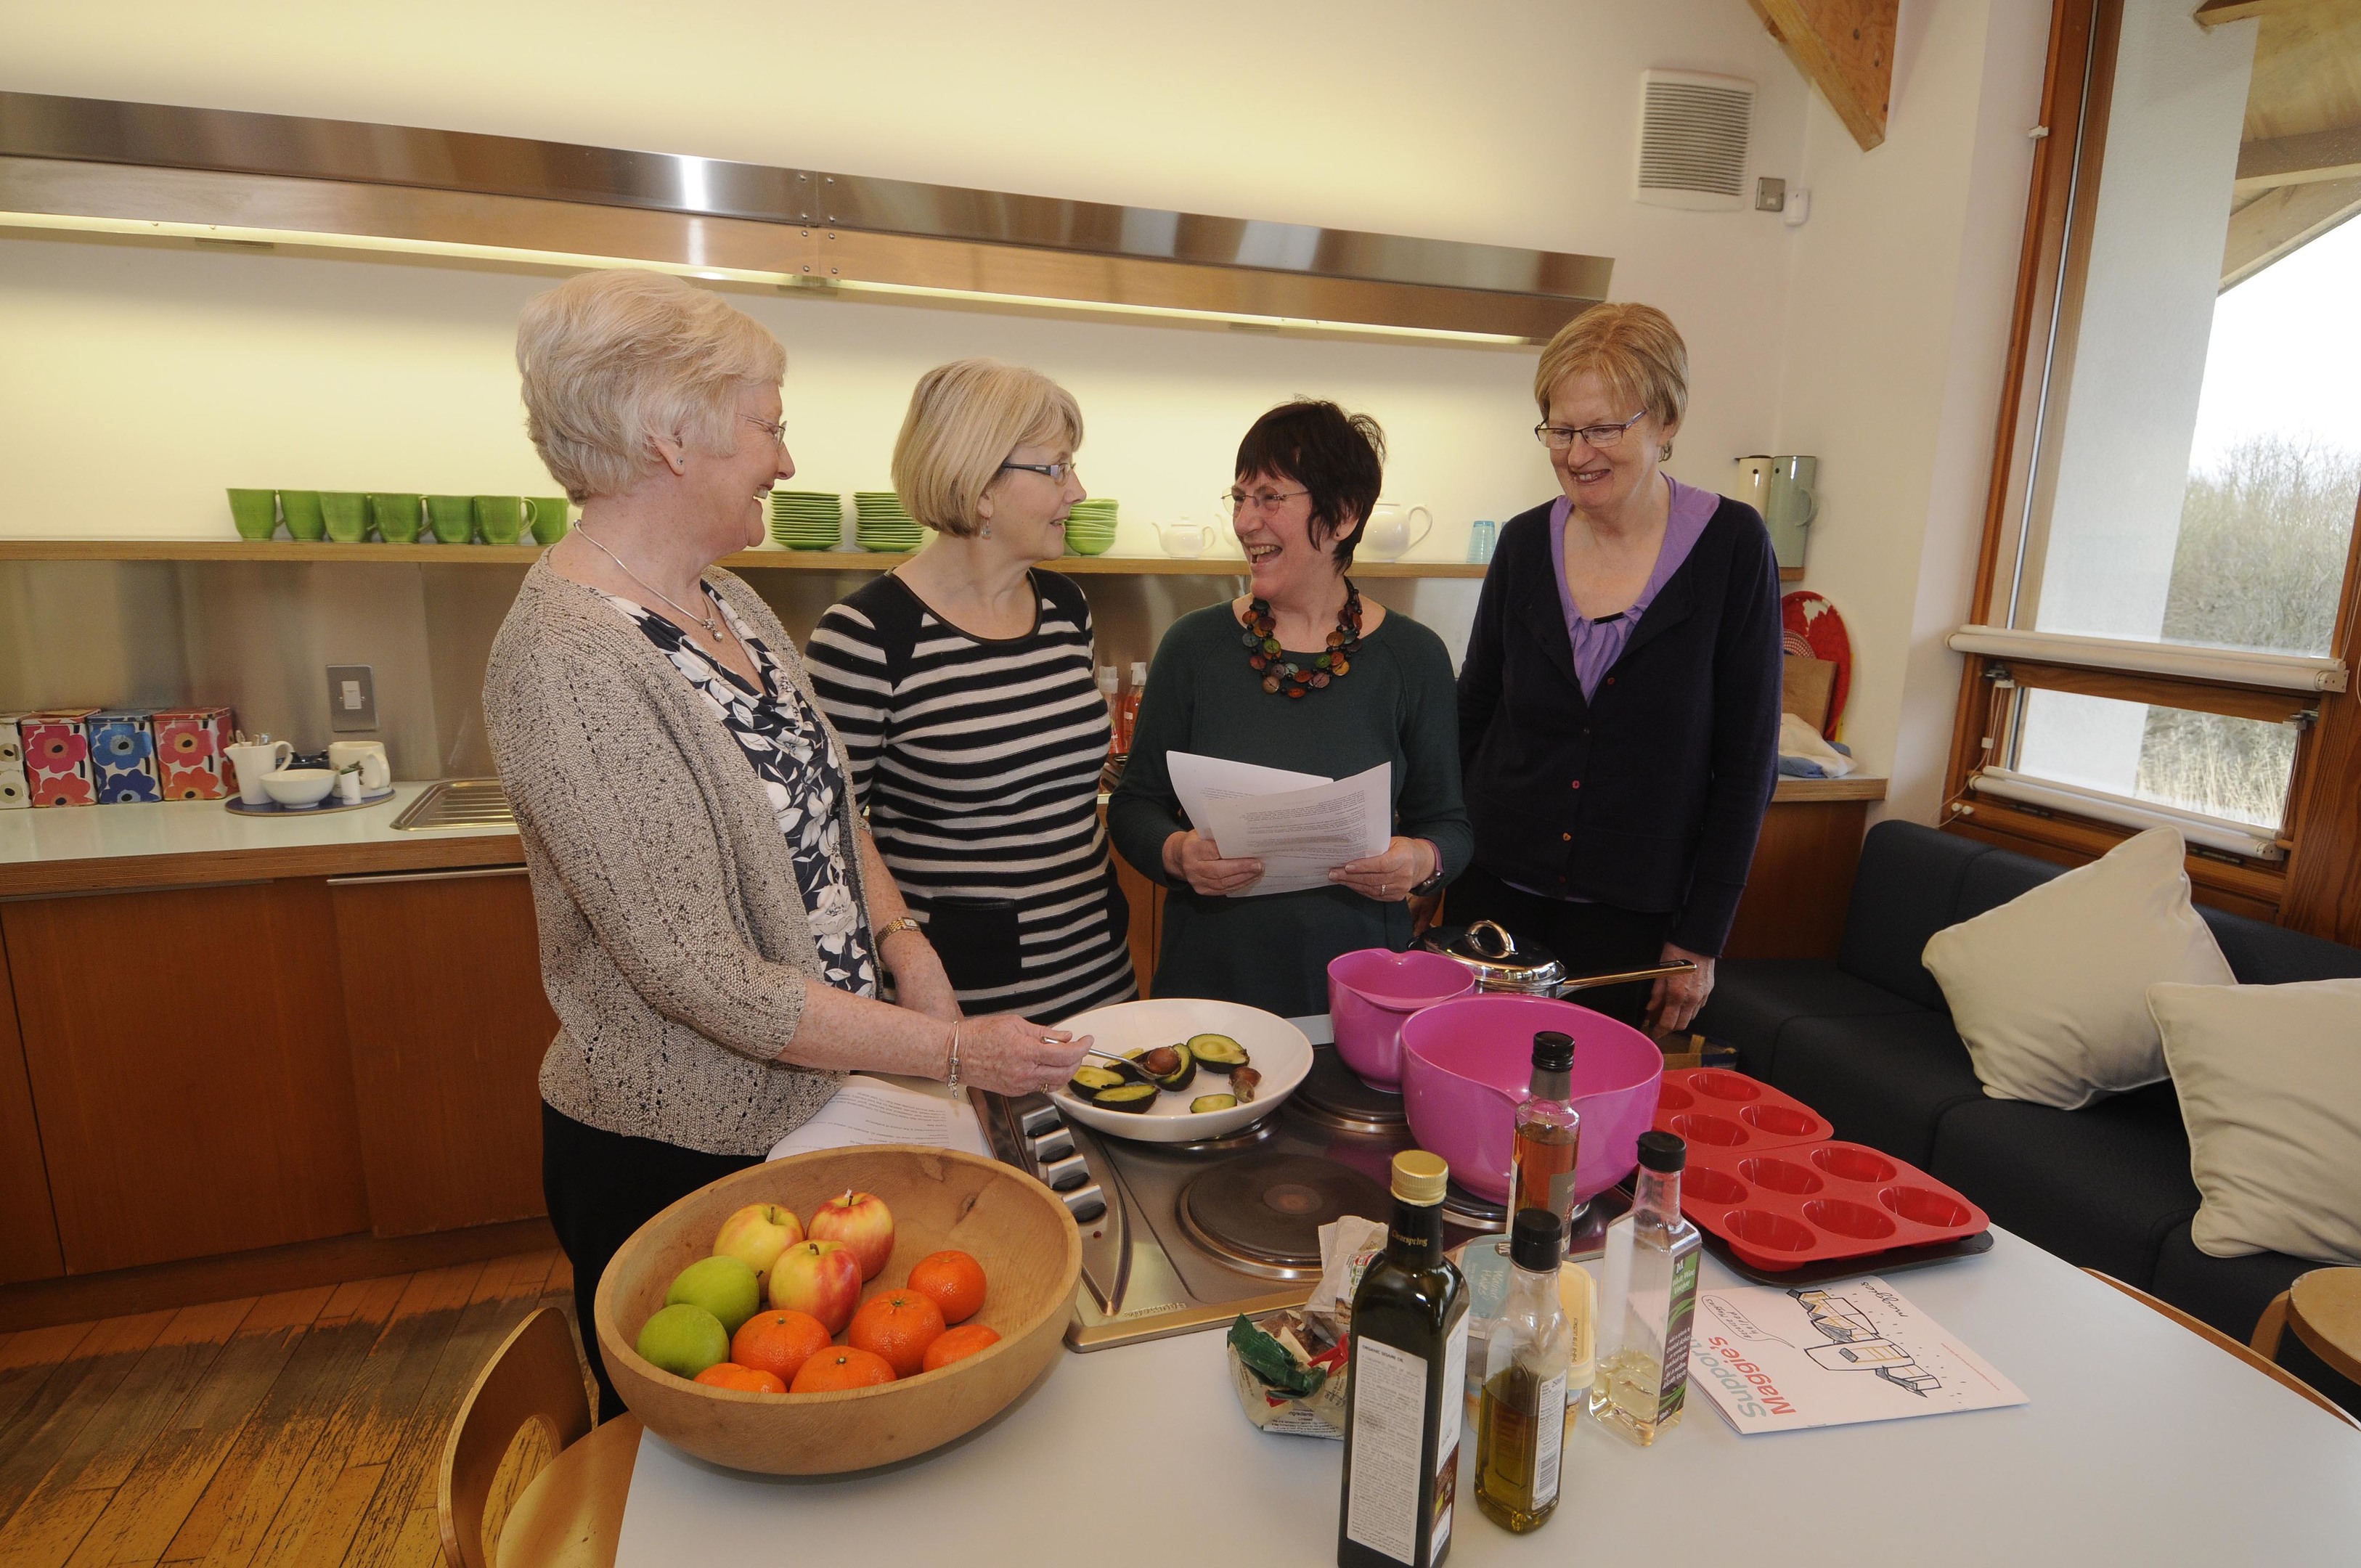 David Martin,Fotopress,Dundee
 Sue Anderson who offers nutrition advice at Dundee Maggies Centre.
PIC- Sue[3rd right] discusses recipes with Lto R. Kay Topen[Voloumnteer]Karen Mckinnon[staff],and Katherine Macnab[Visitor]